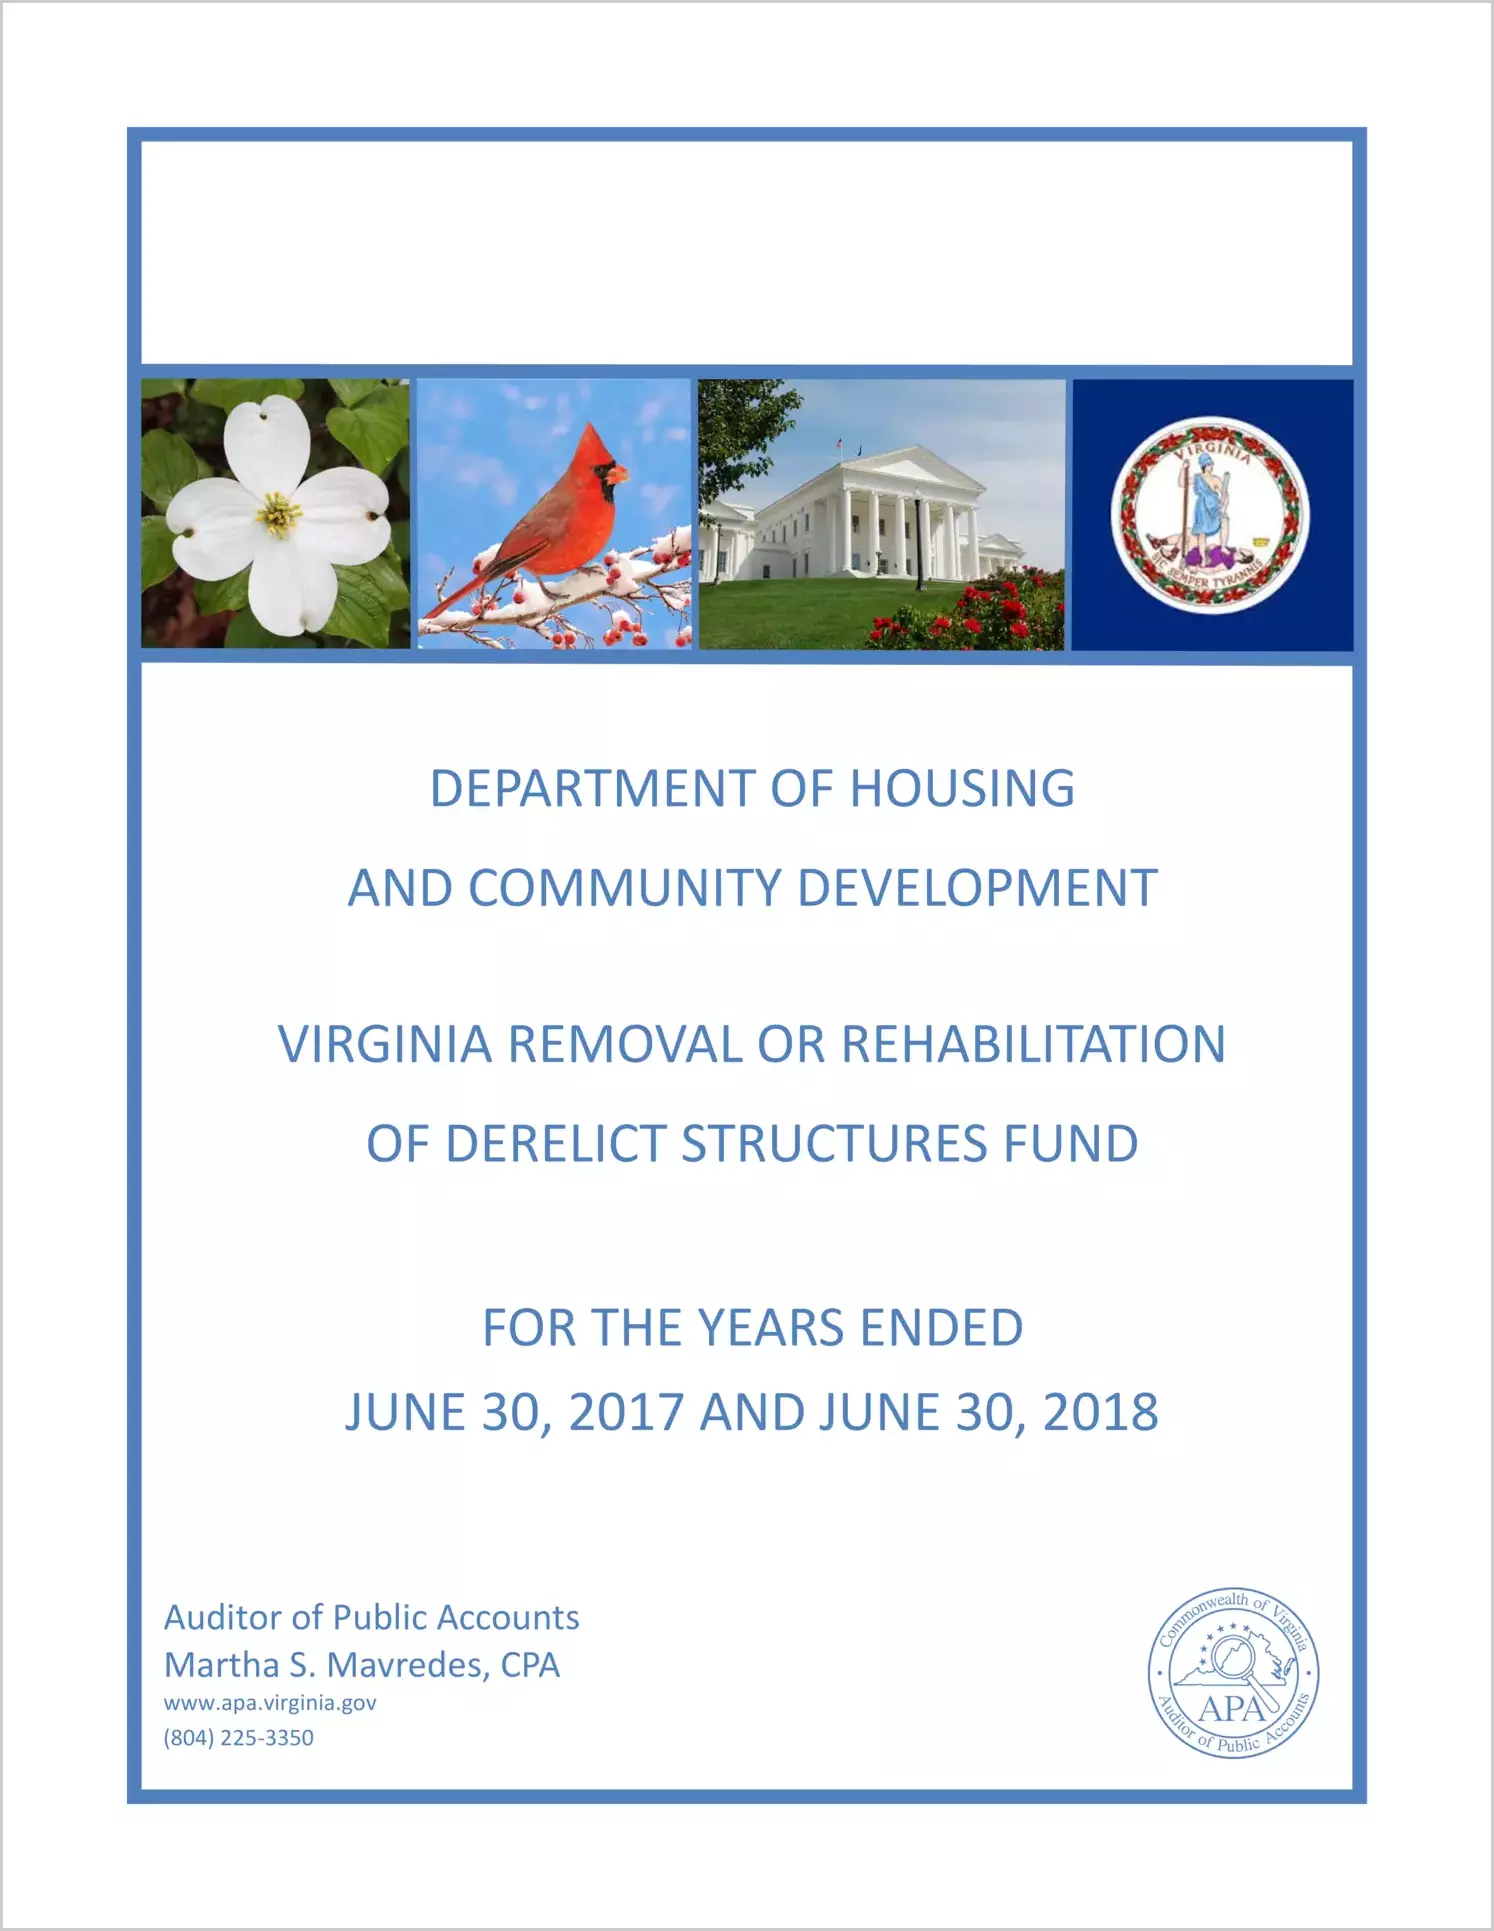 Department of Housing and Community Development Virginia Removal or Rehabilitation of Derelict Structures Fund for the years ended June 30, 2017 and June 30, 2018